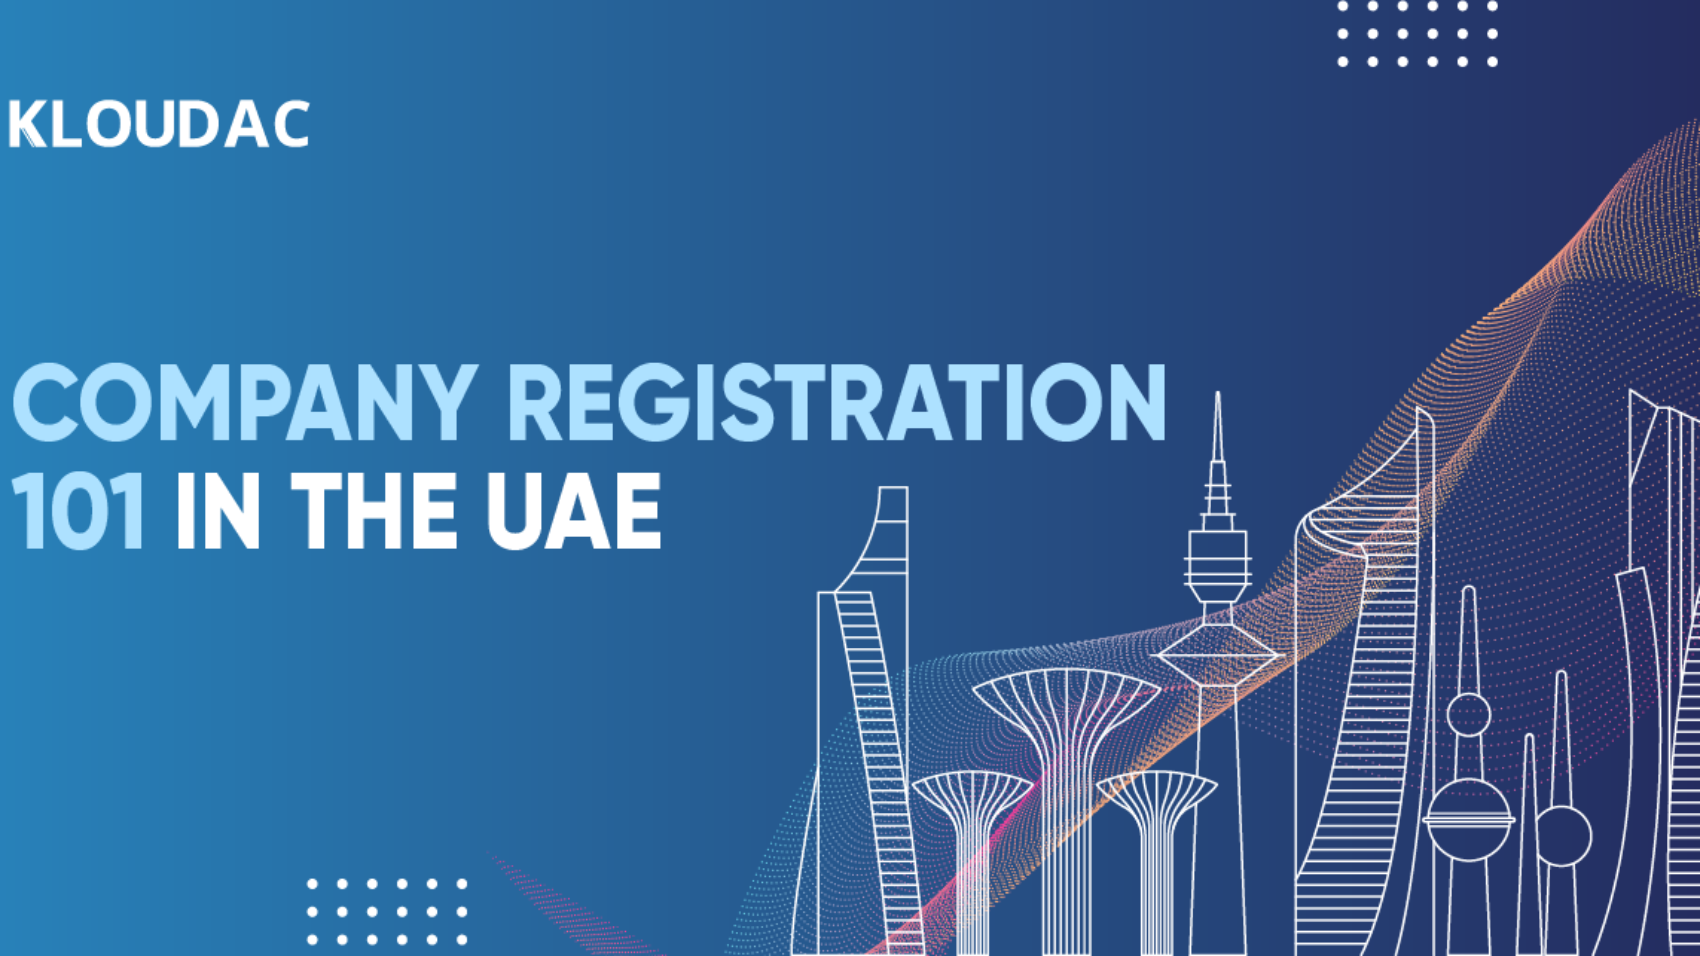 3. Company registration 101 in the UAE